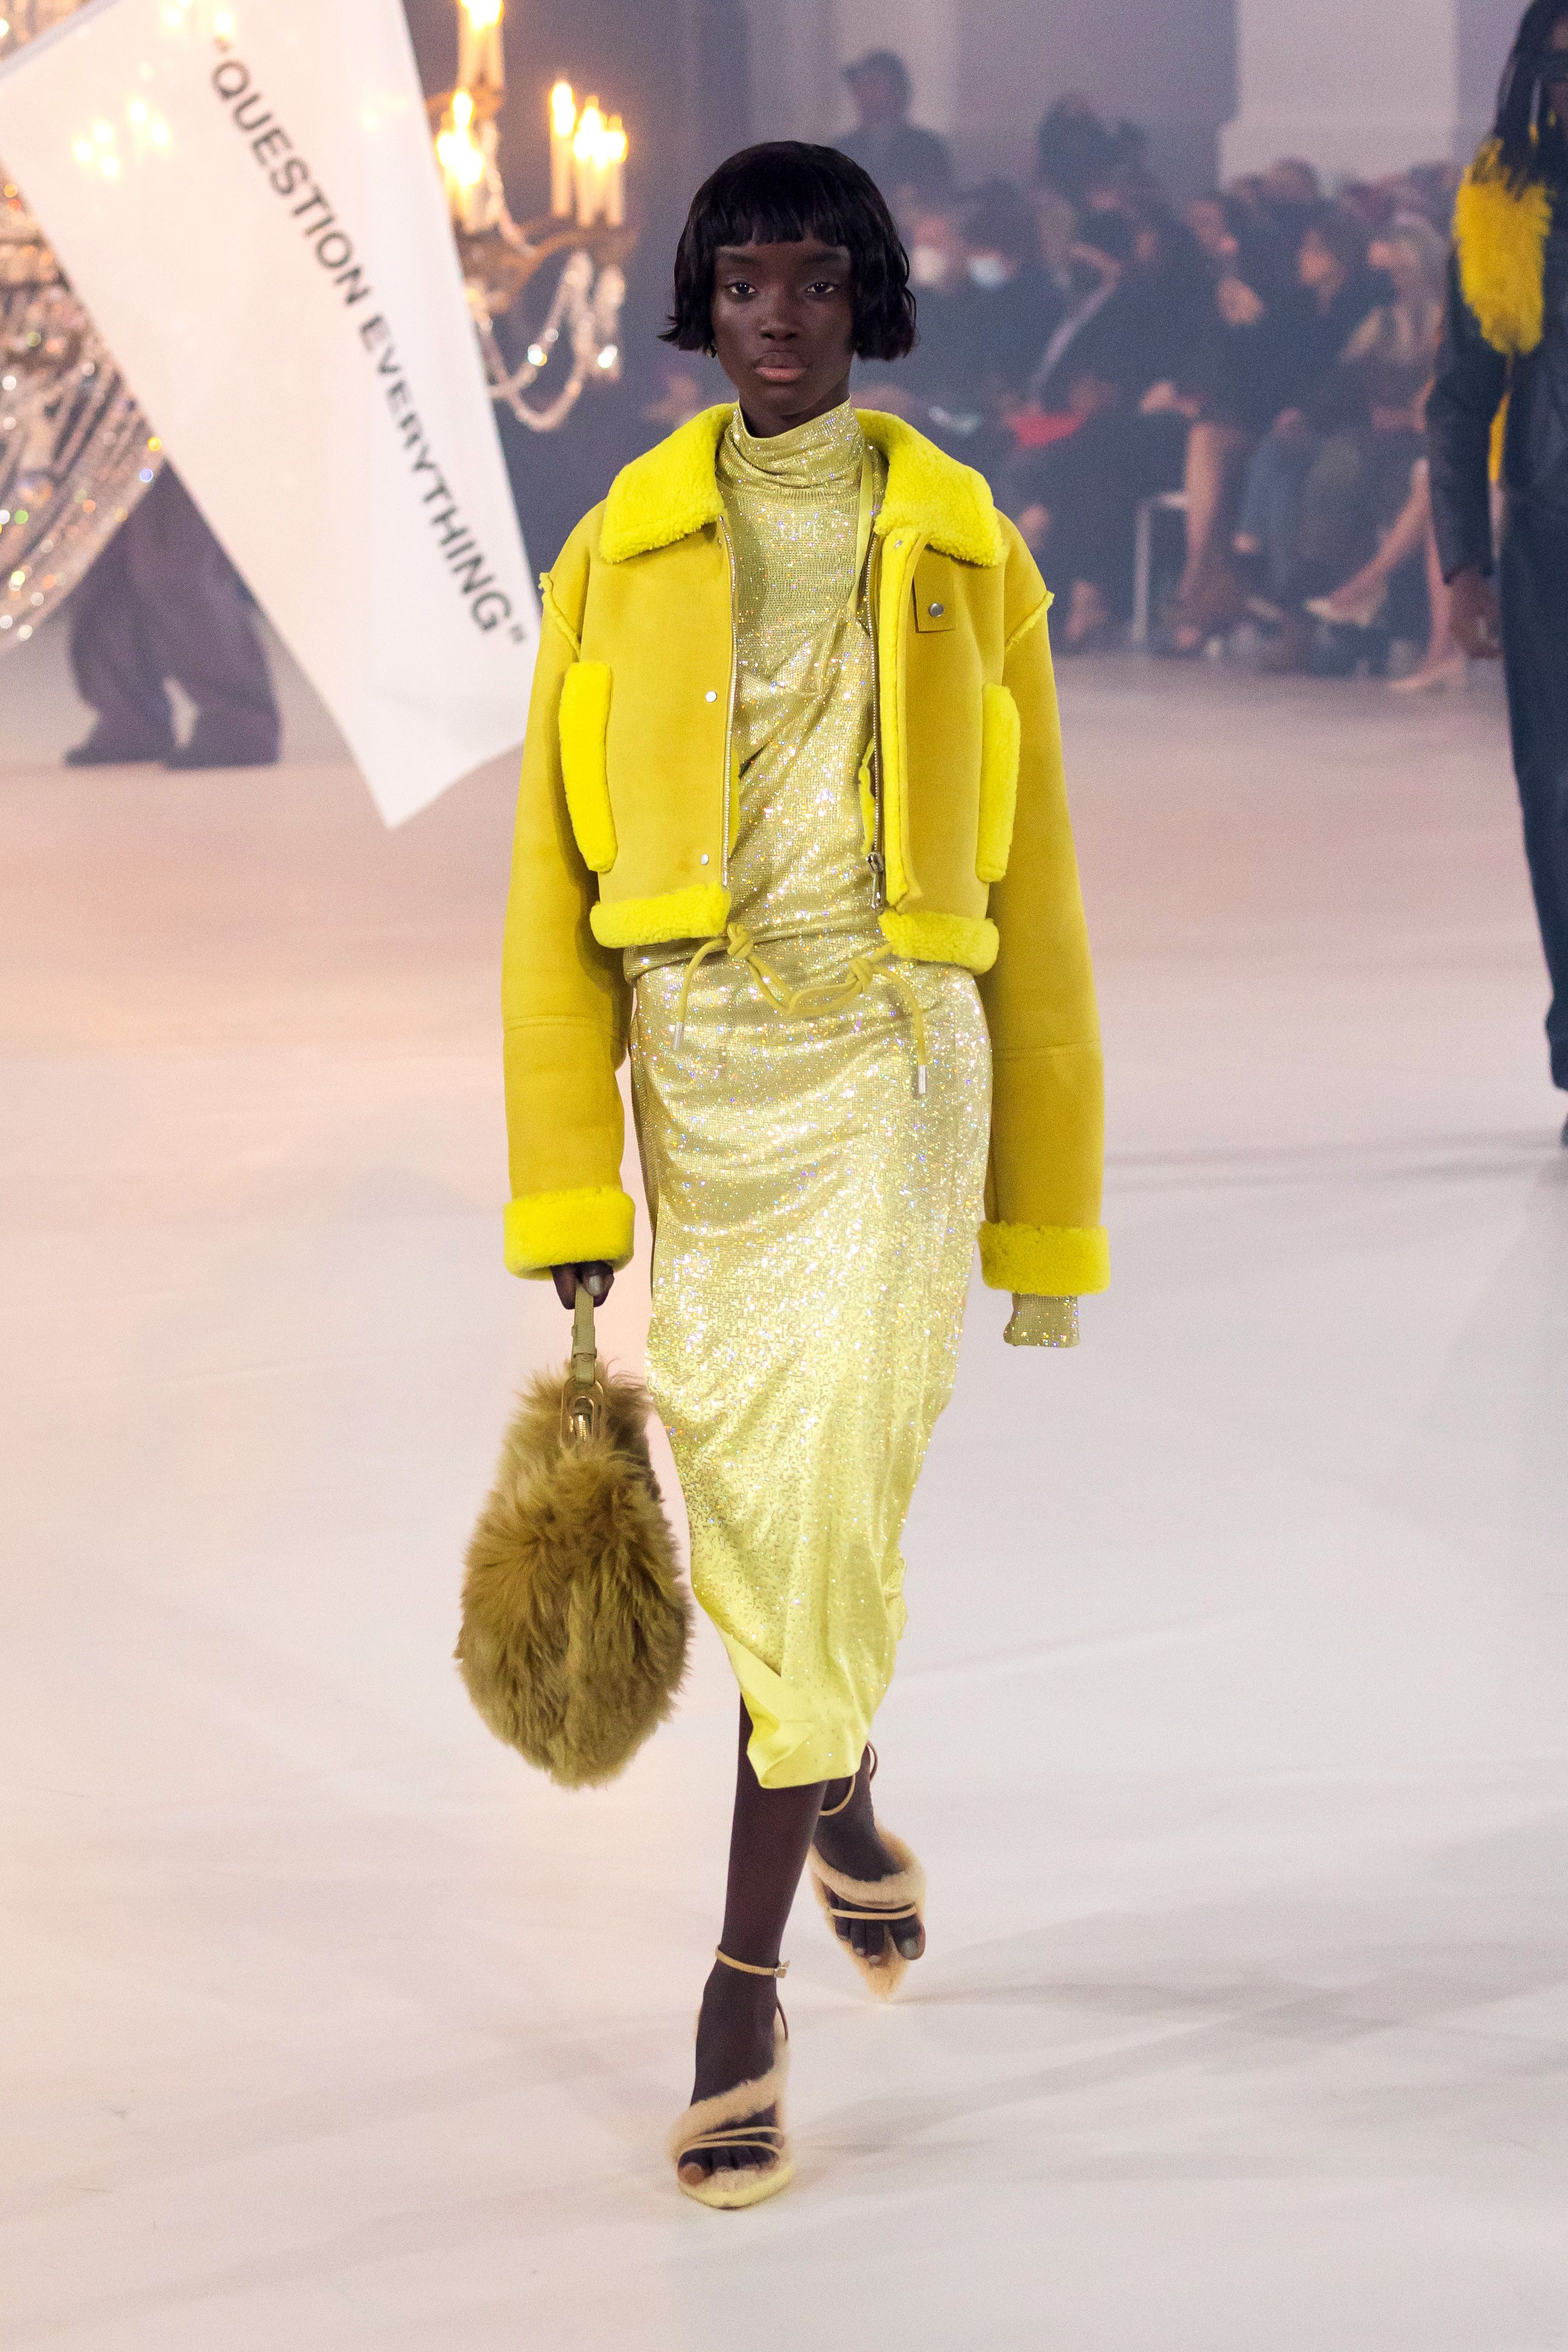 The 6 Best Fall 2022 Bag Trends From the Runways  Best Fall Fashion Trends